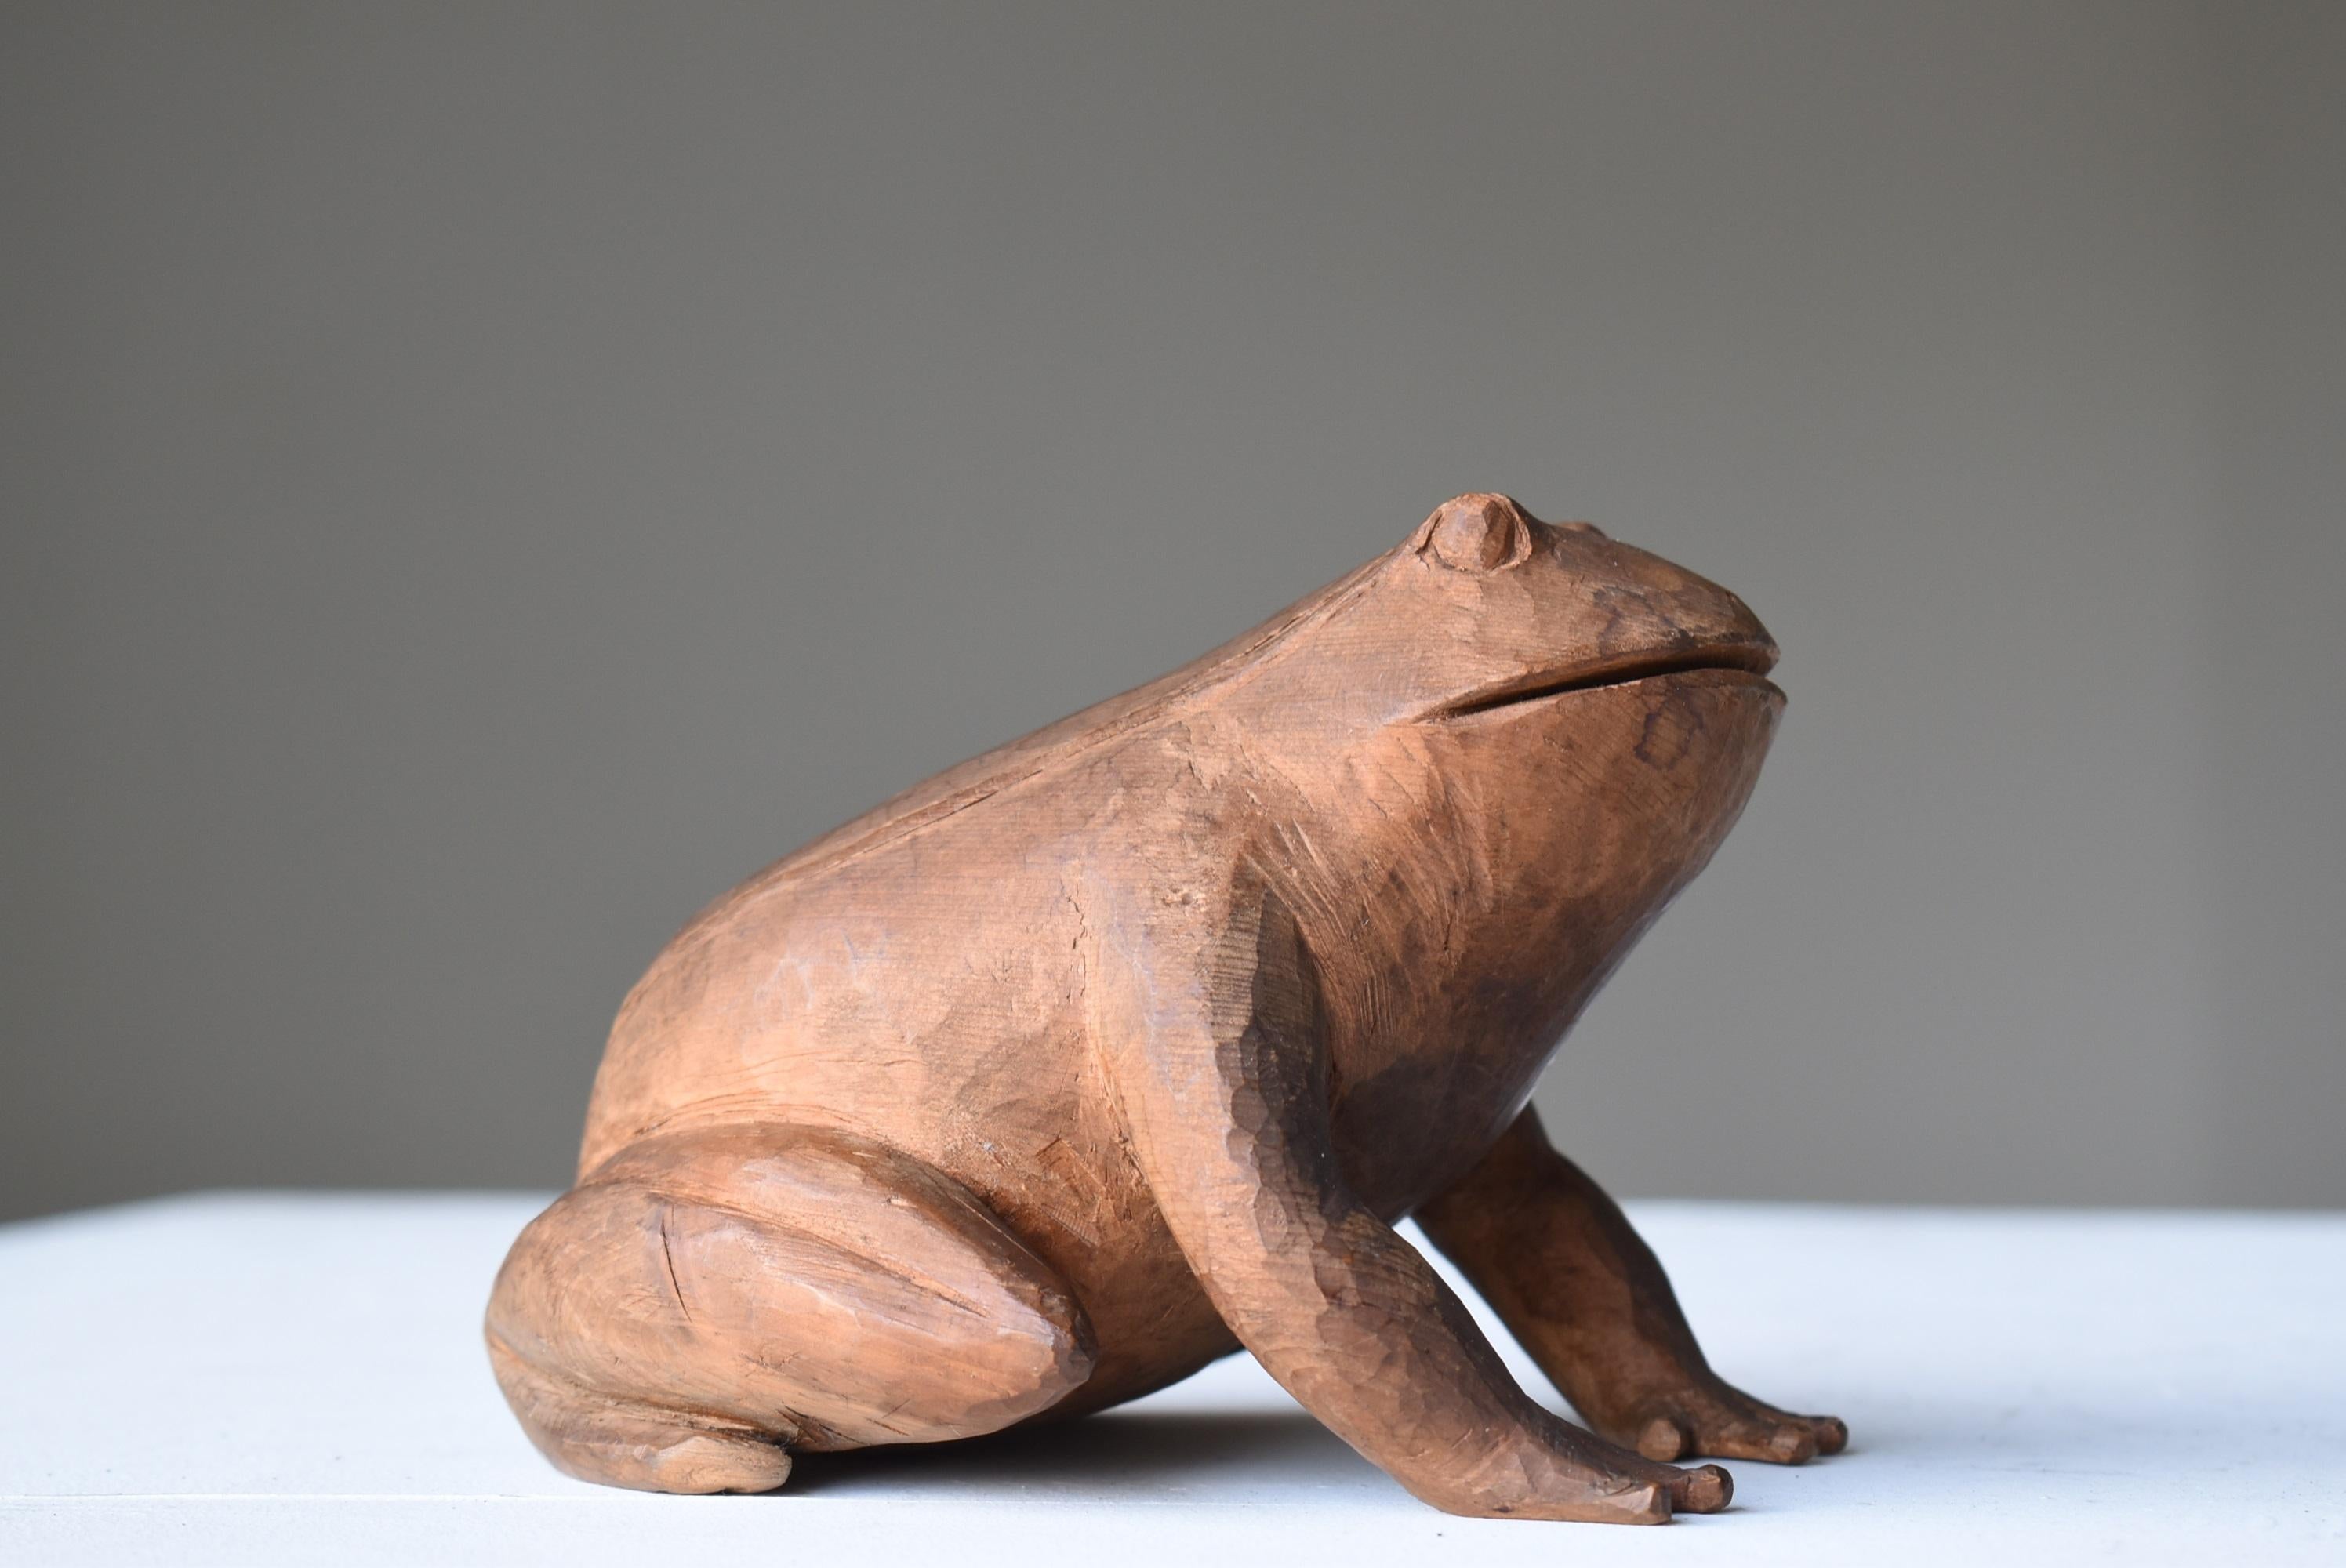 Japanese Antique Wood Carving Frog 1860s-1920s/sculpture Mingei Object 1